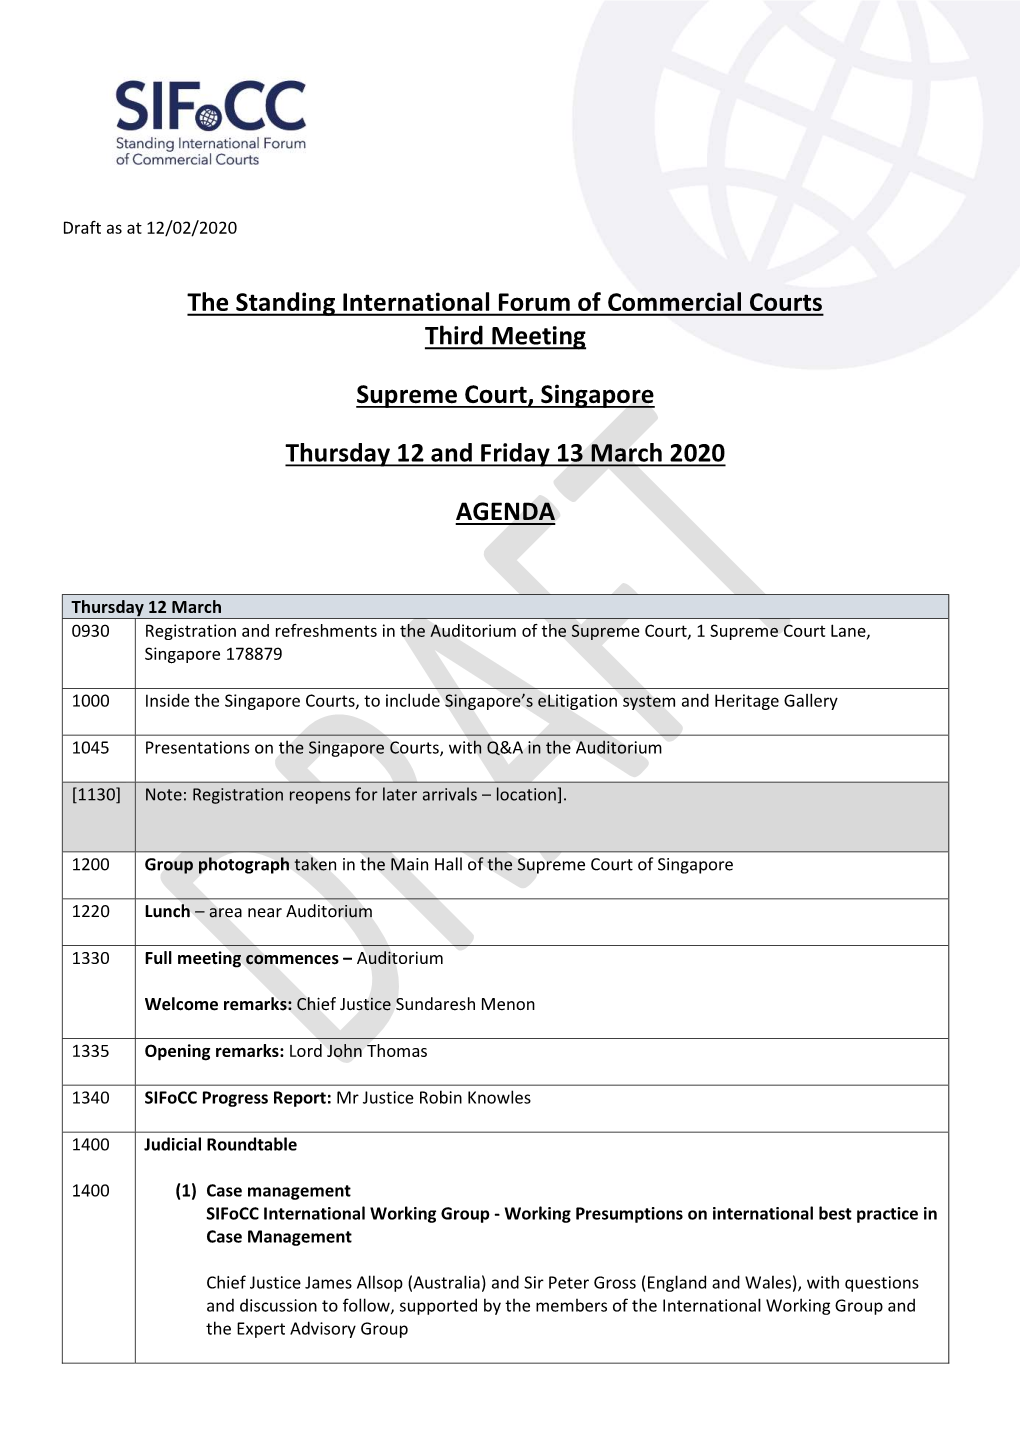 The Standing International Forum of Commercial Courts Third Meeting